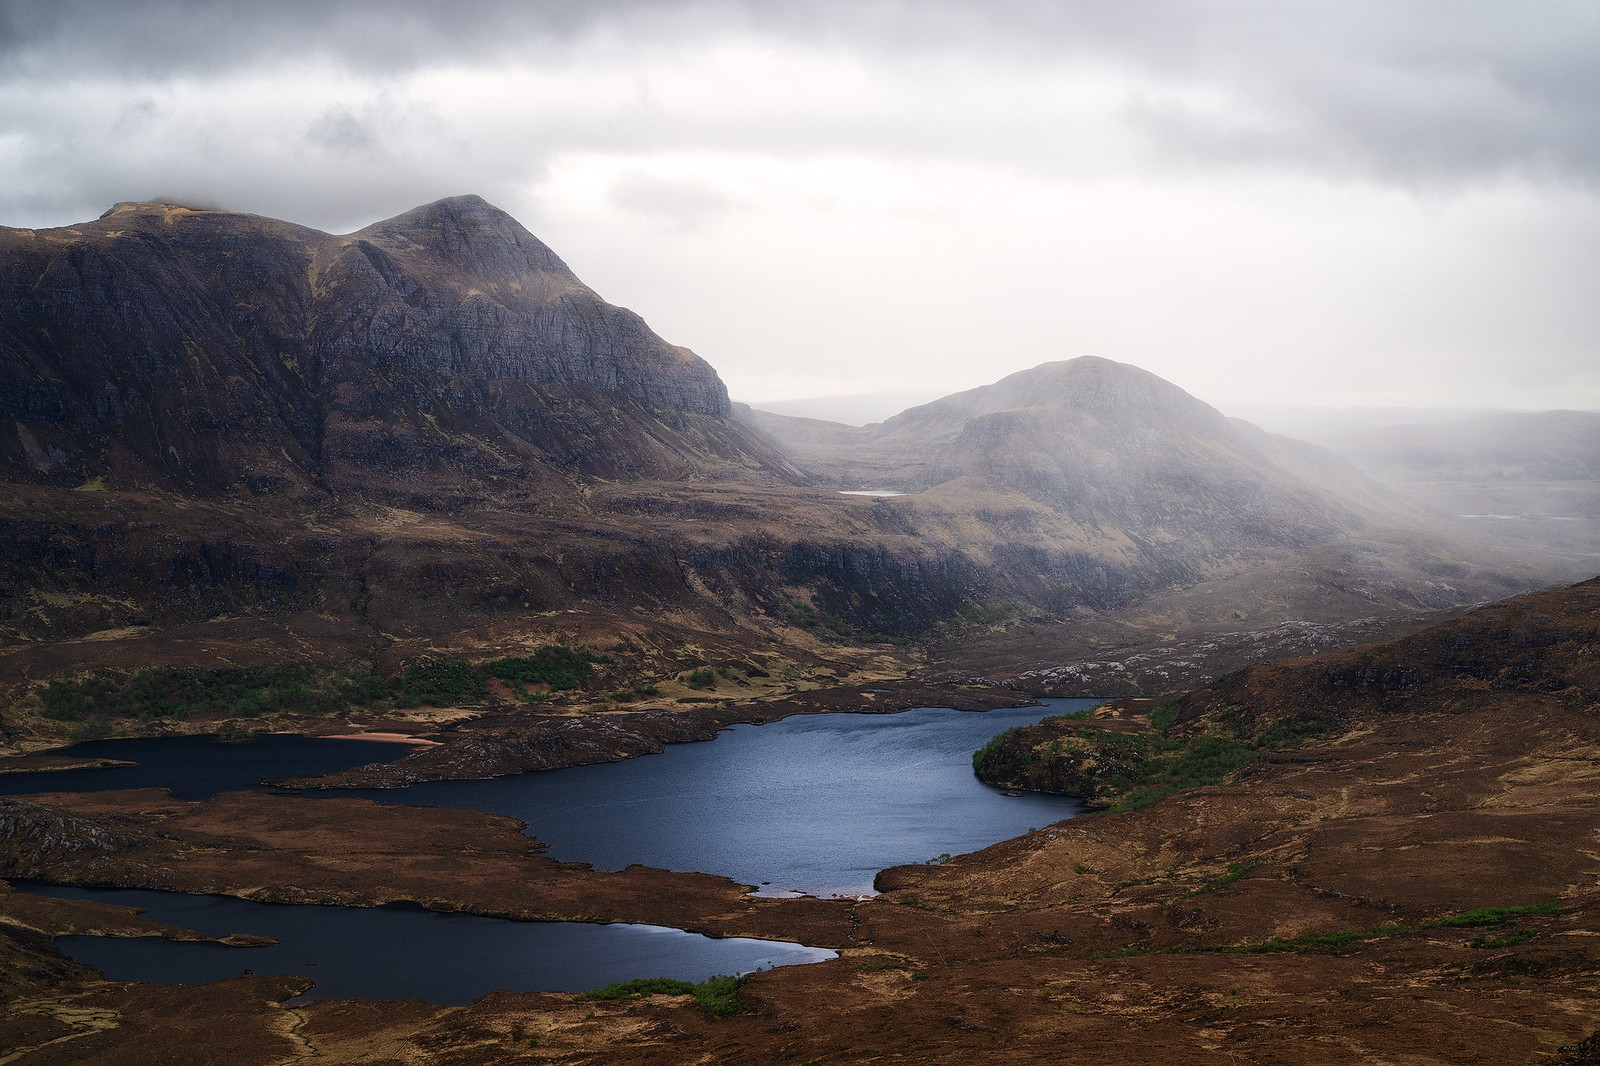 Lakes and hills - Stac Pollaidh